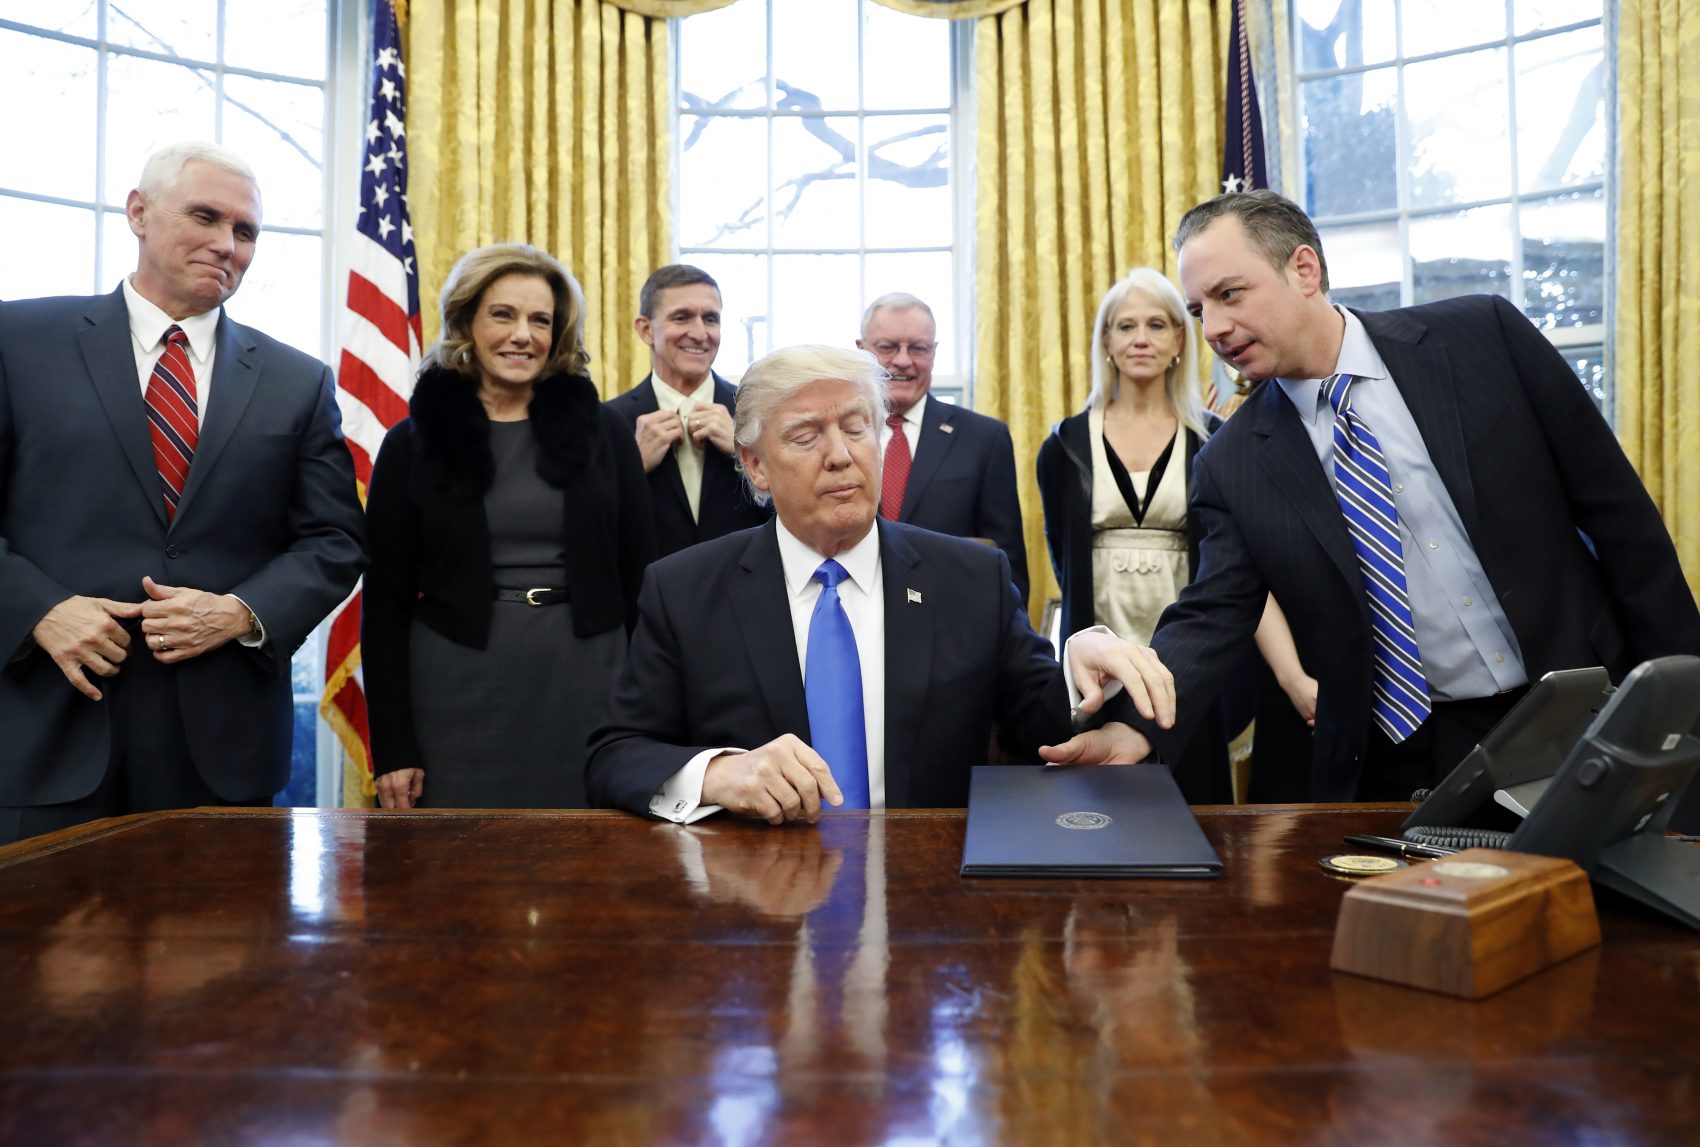 President Donald Trump is handed an Executive Order to sign by White House Chief of Staff Reince Priebus with Vice President Mike Pence and others in the Oval Office Saturday. (Alex Brandon/AP)